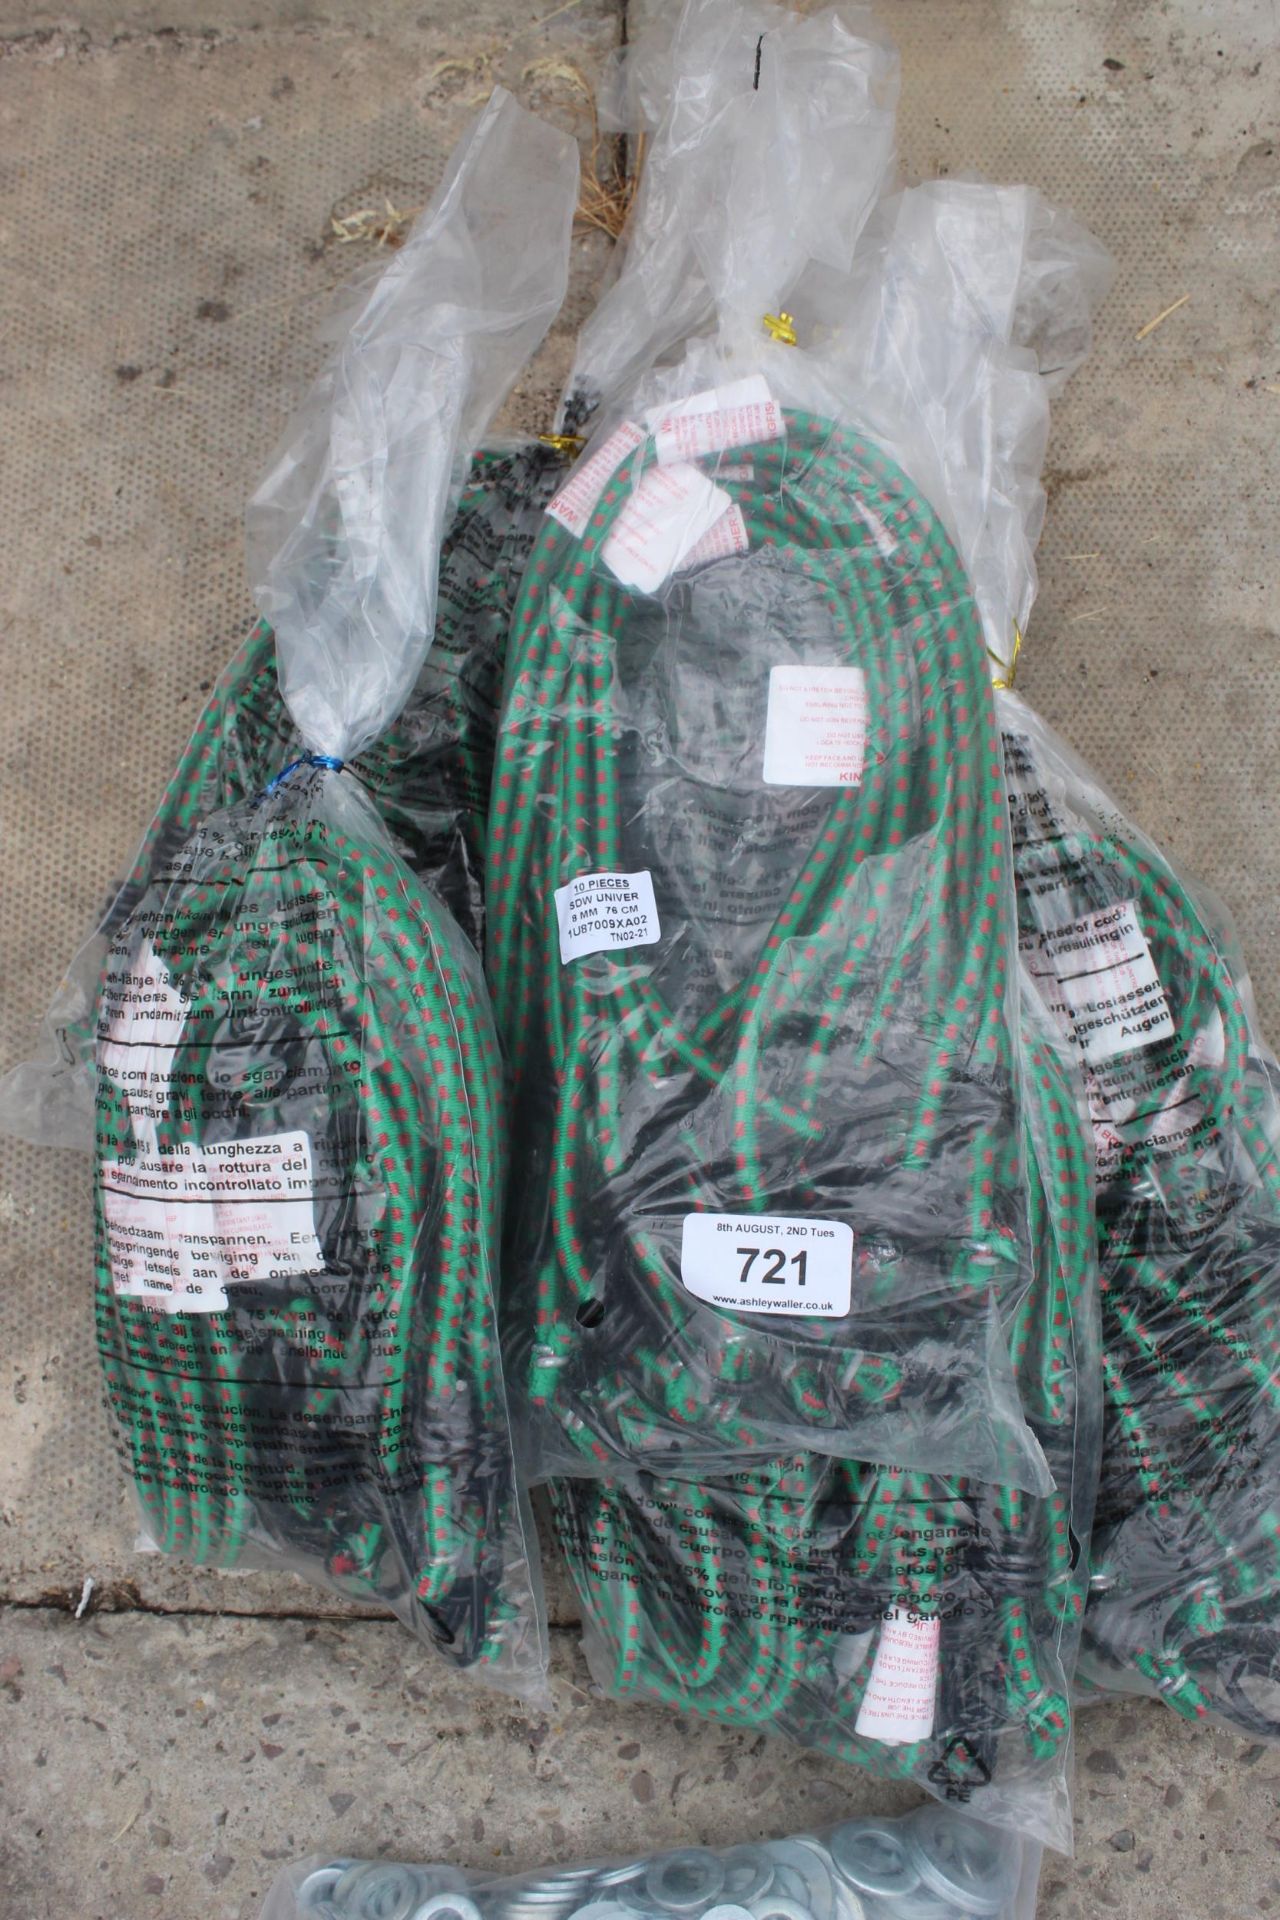 6 BAGS OF BUNGEE STRAPS + VAT